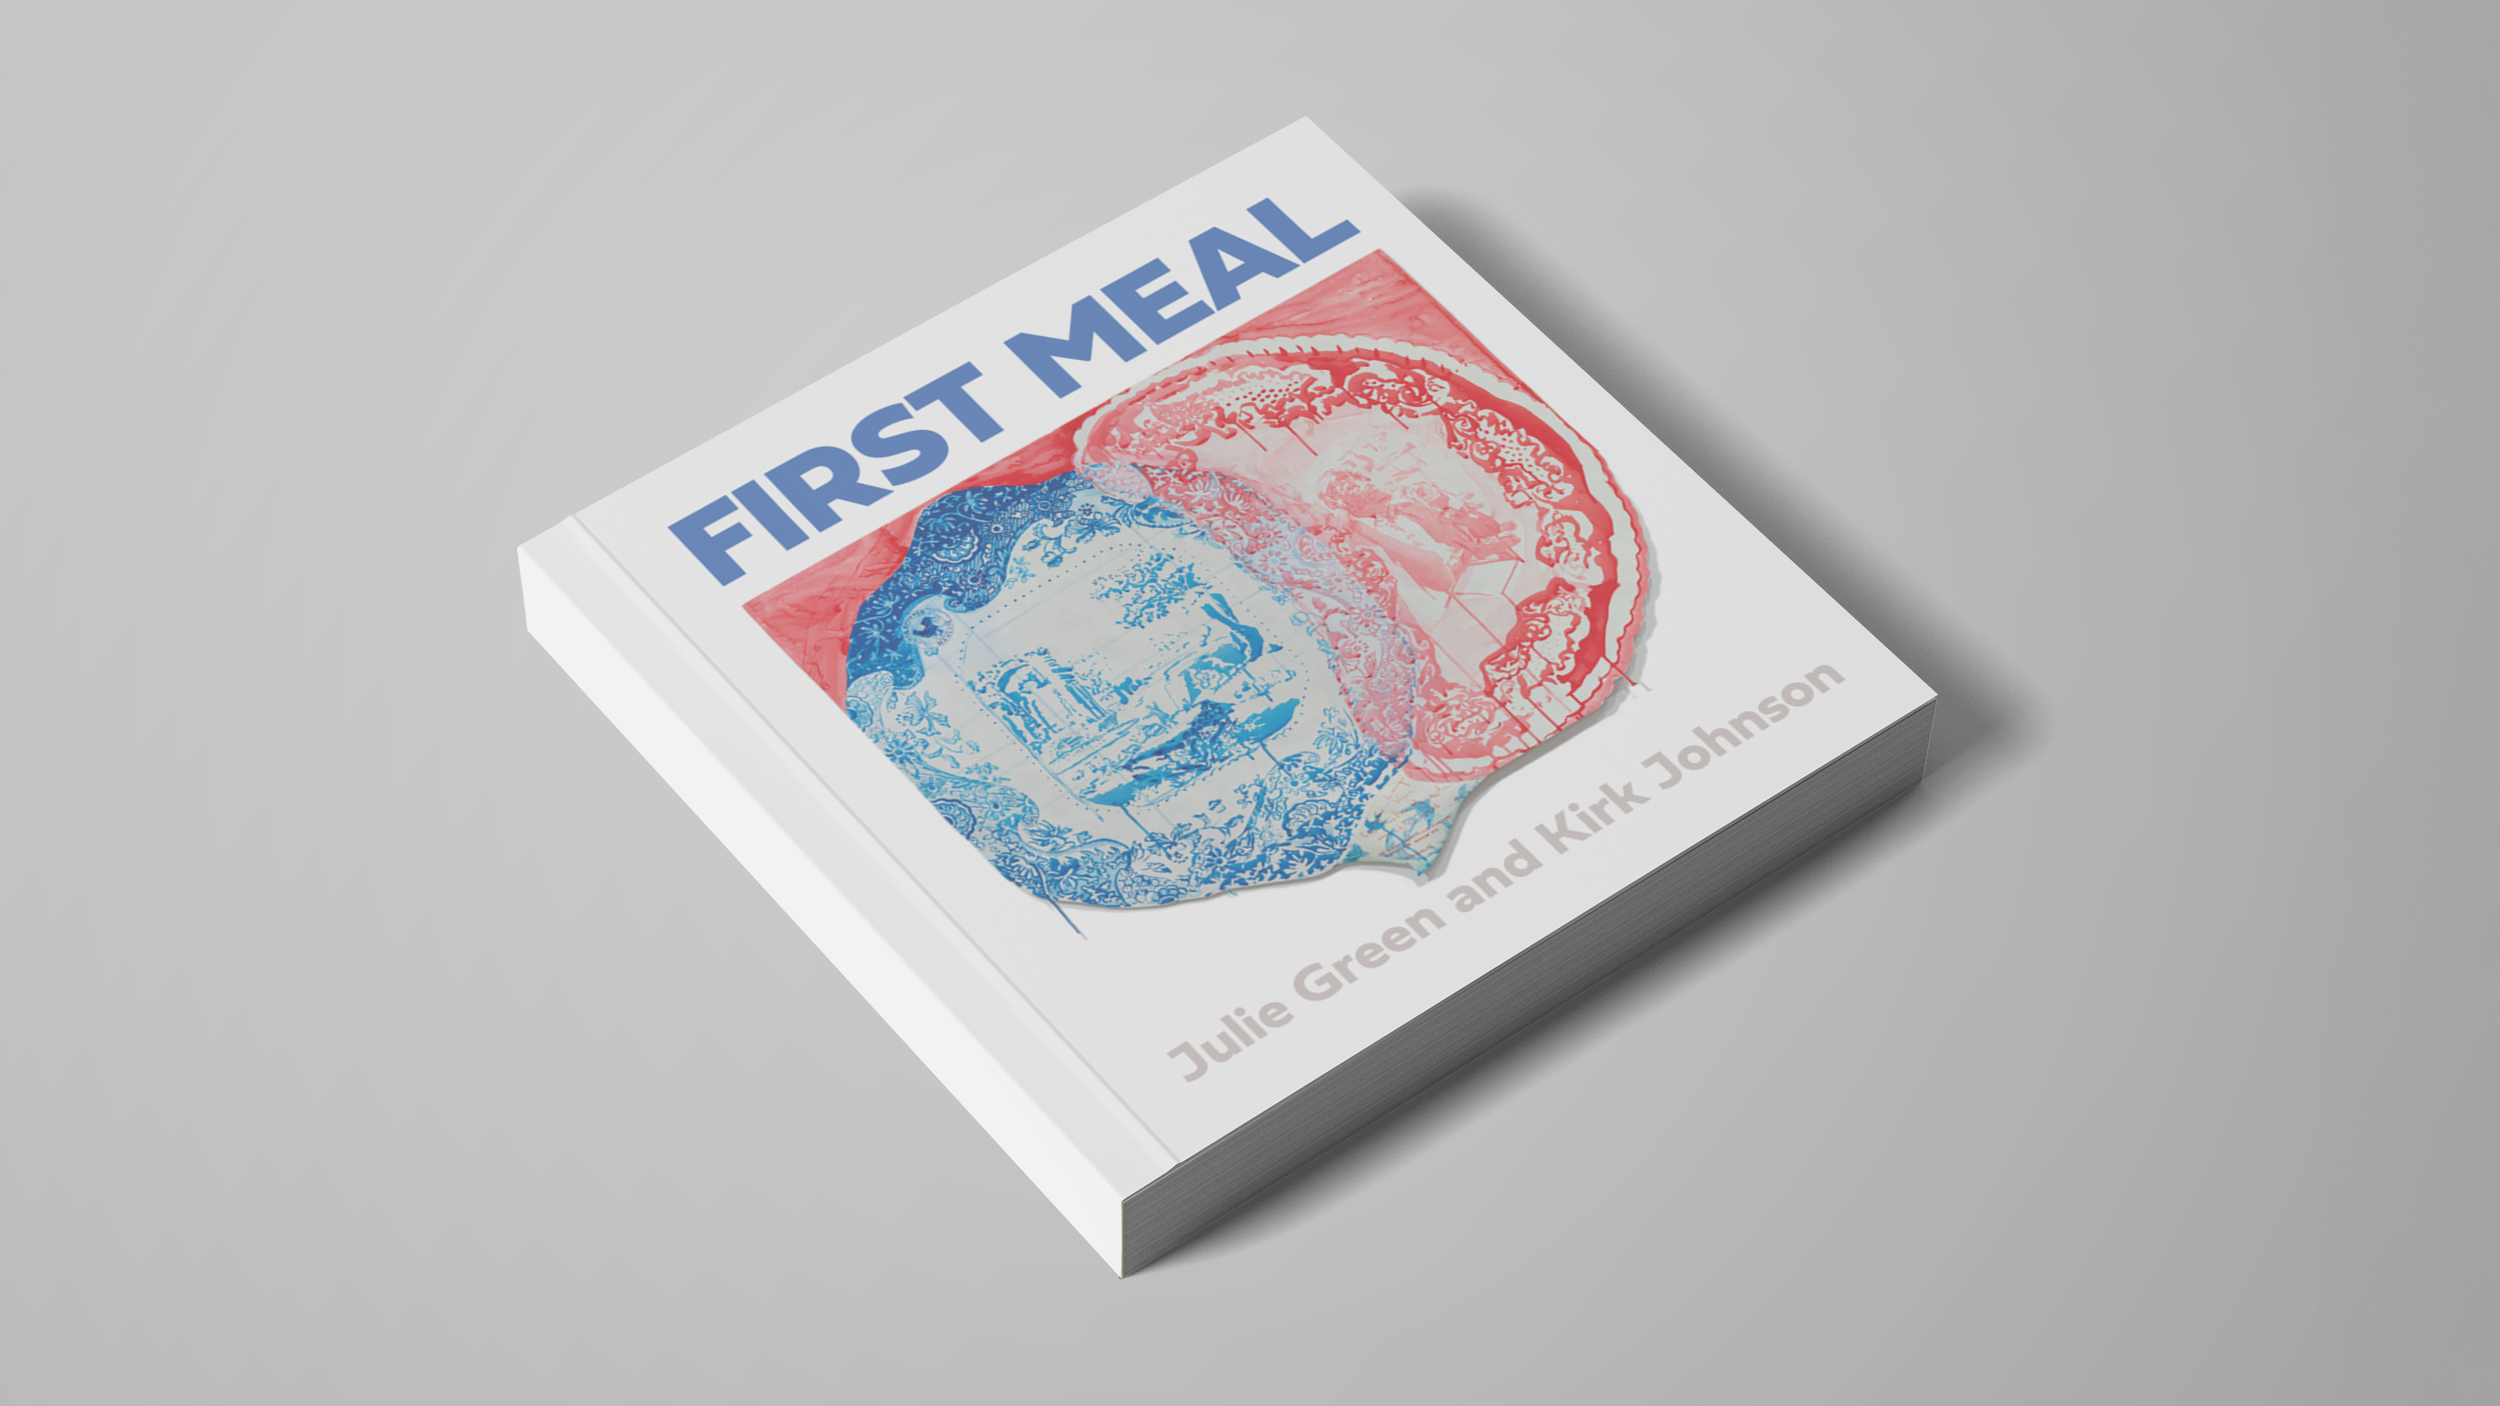 "First Meal" - a gripping book unraveling the truth behind a wrongful conviction.